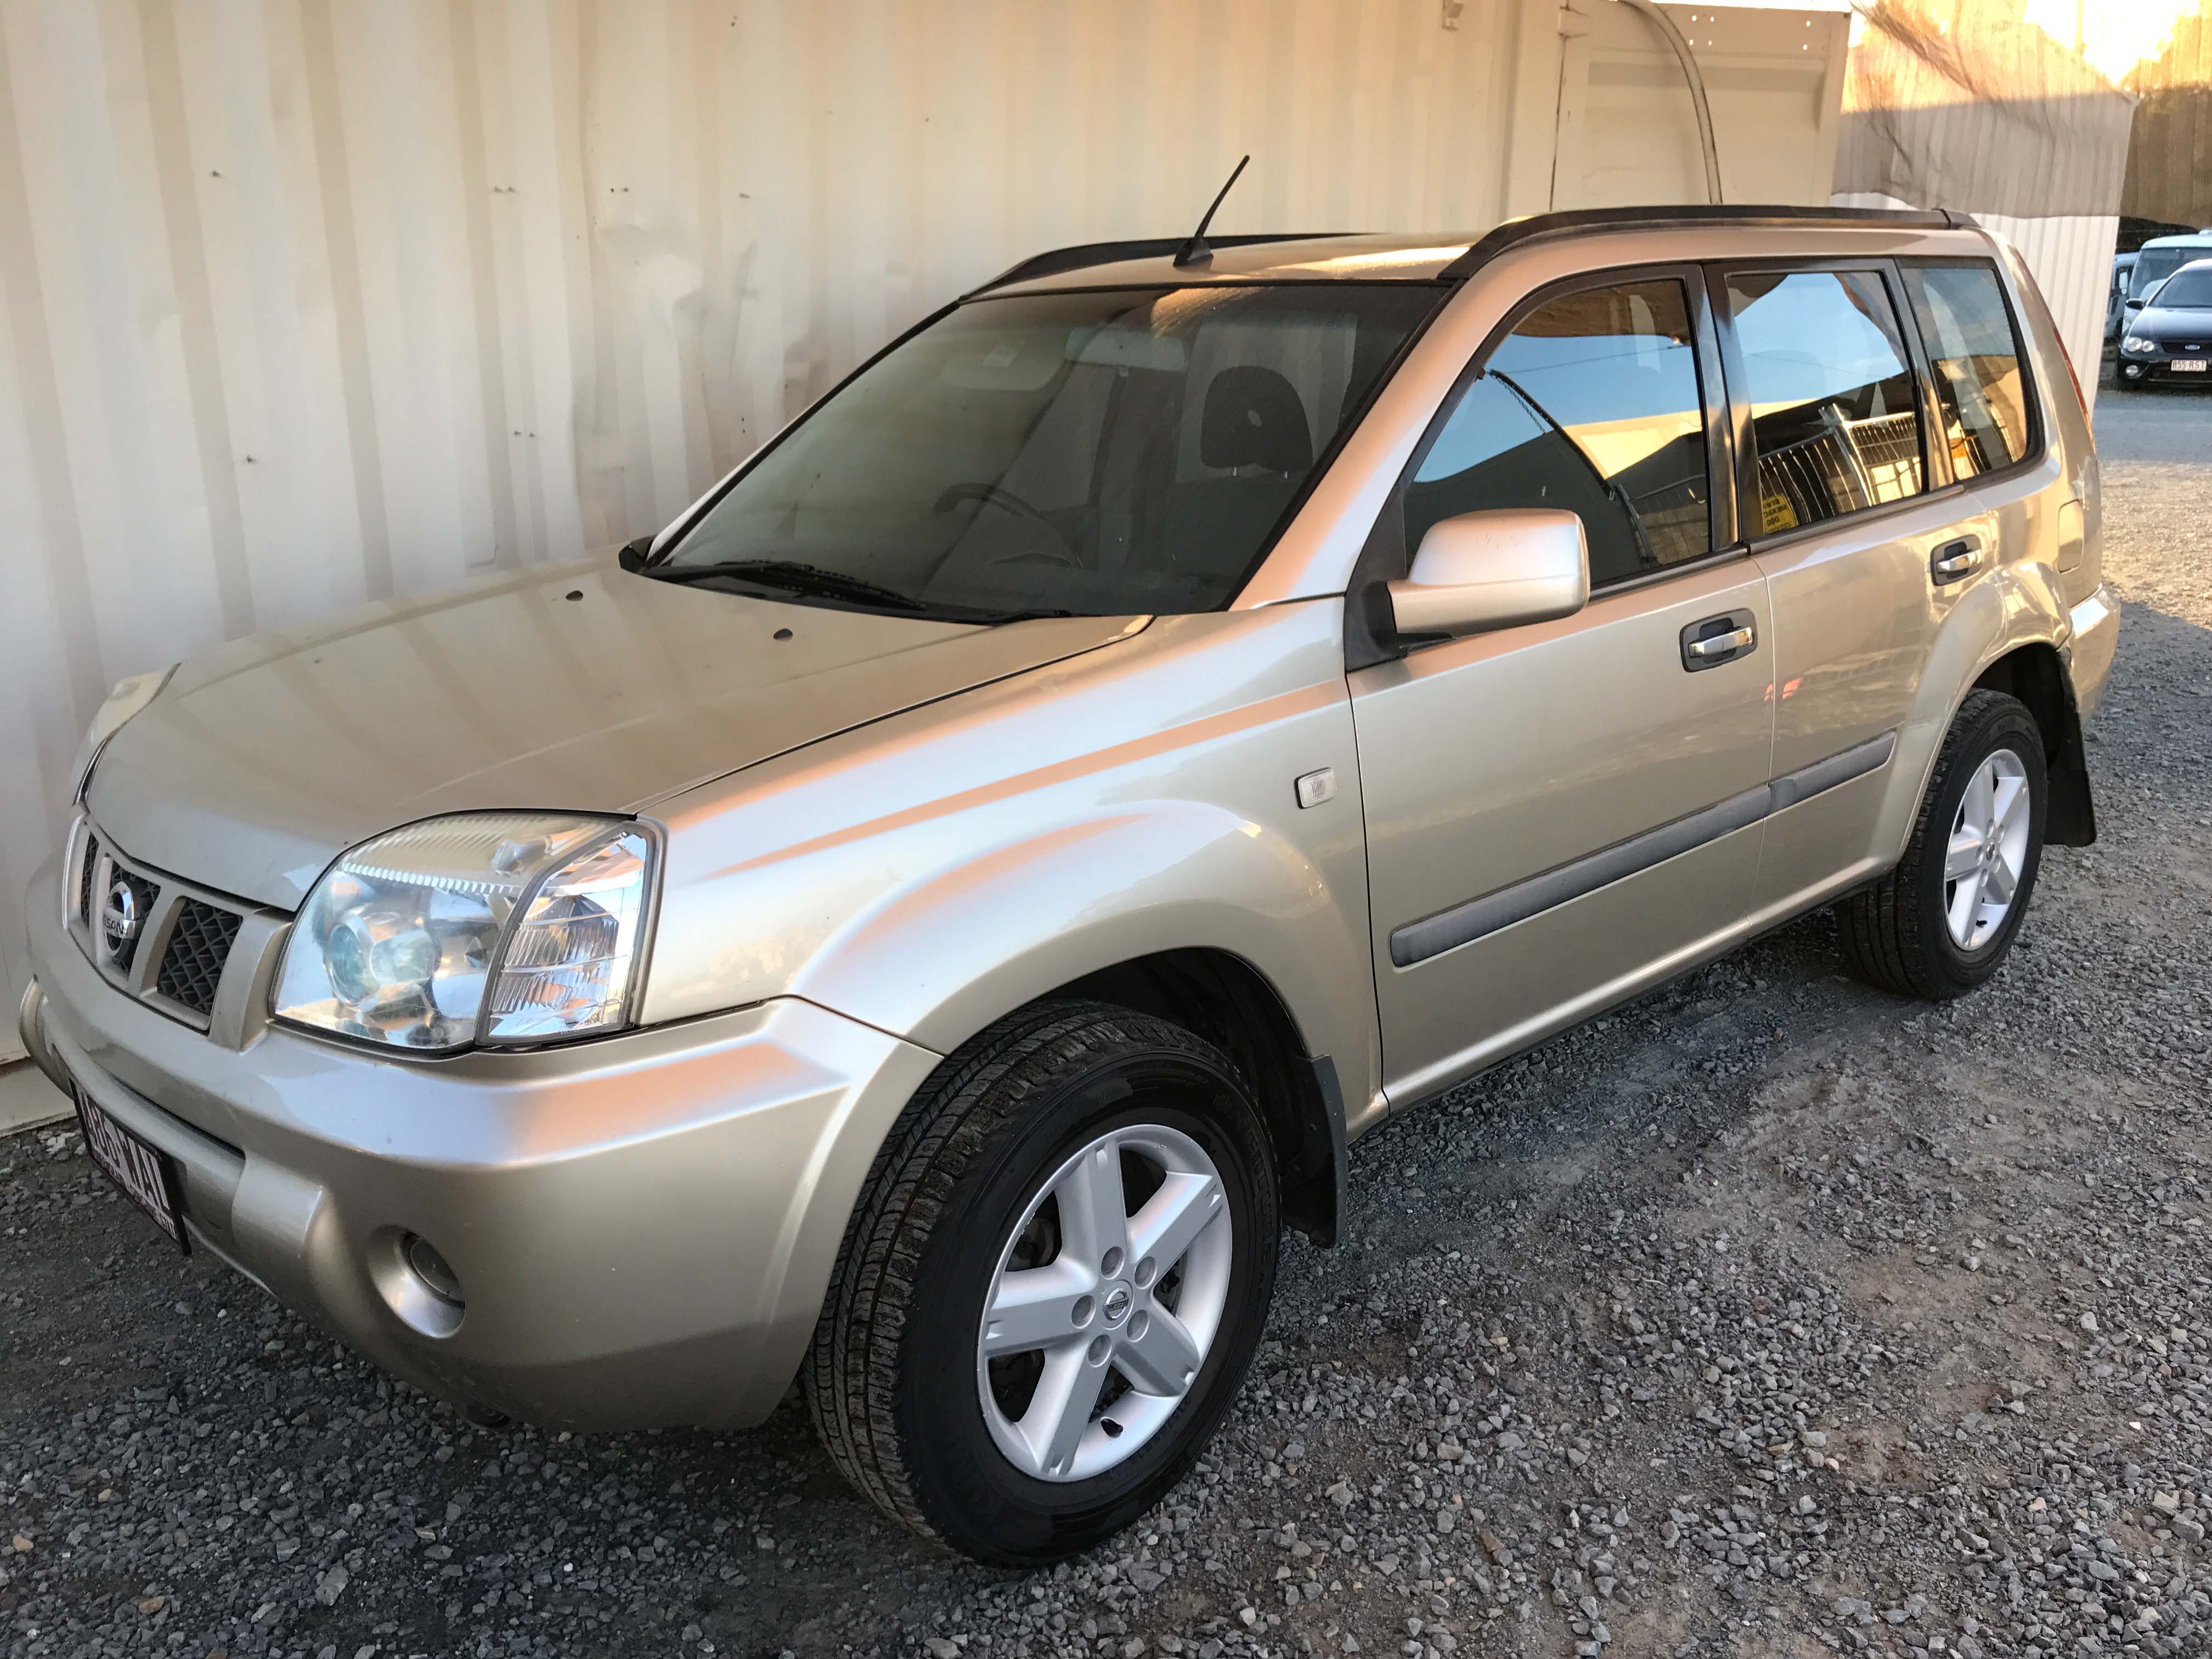 (SOLD) Excellent condition ST-S 4x4 SUV Nissan X-Trail 2006 - Used